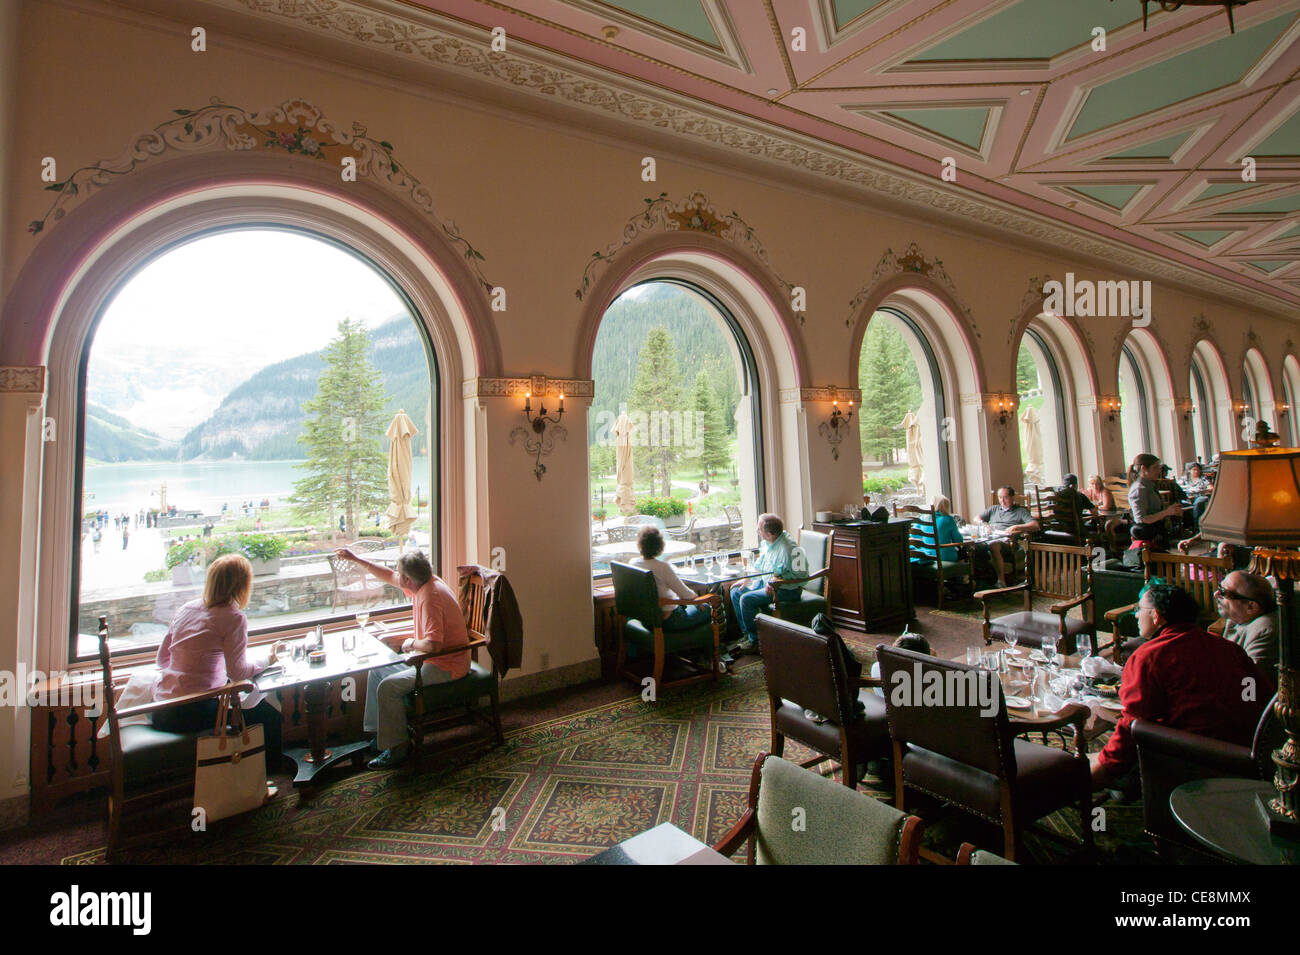 People viewing Lake Louise from the restaurant inside The Fairmont Chateau Lake Louise Hotel in Banff National Park Alberta Canada Stock Photo